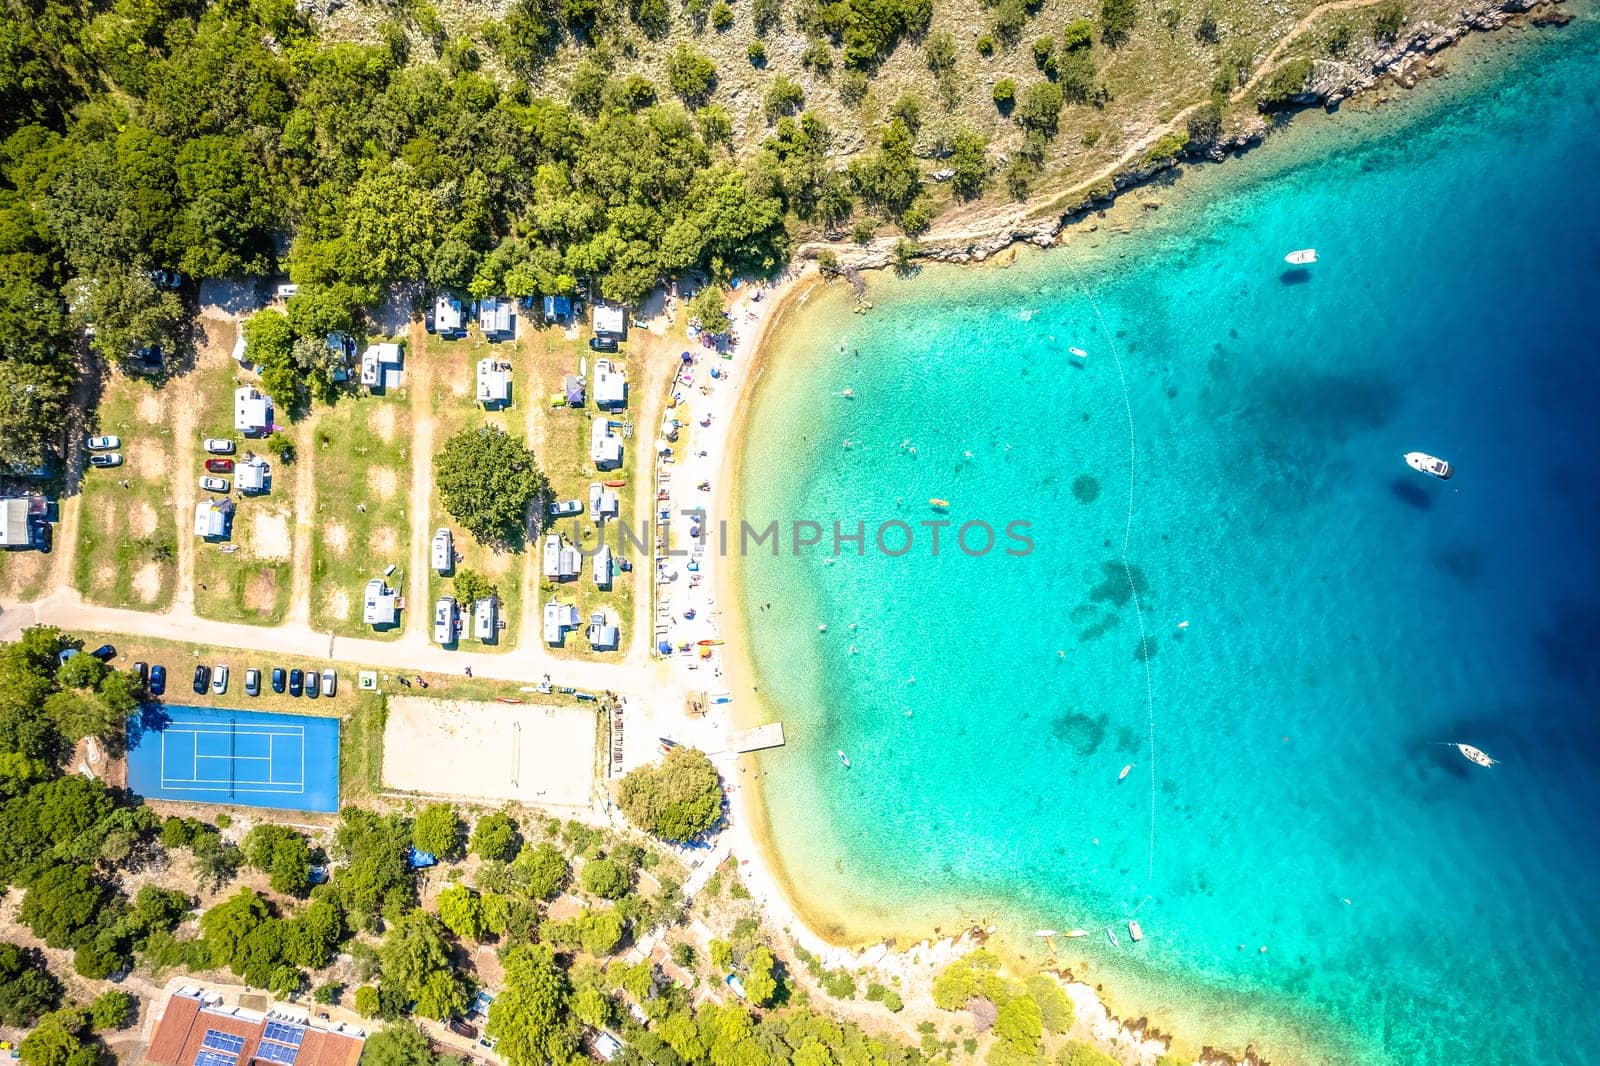 Camping by the idyllic turquoise beach in Punat, island of Krk by xbrchx